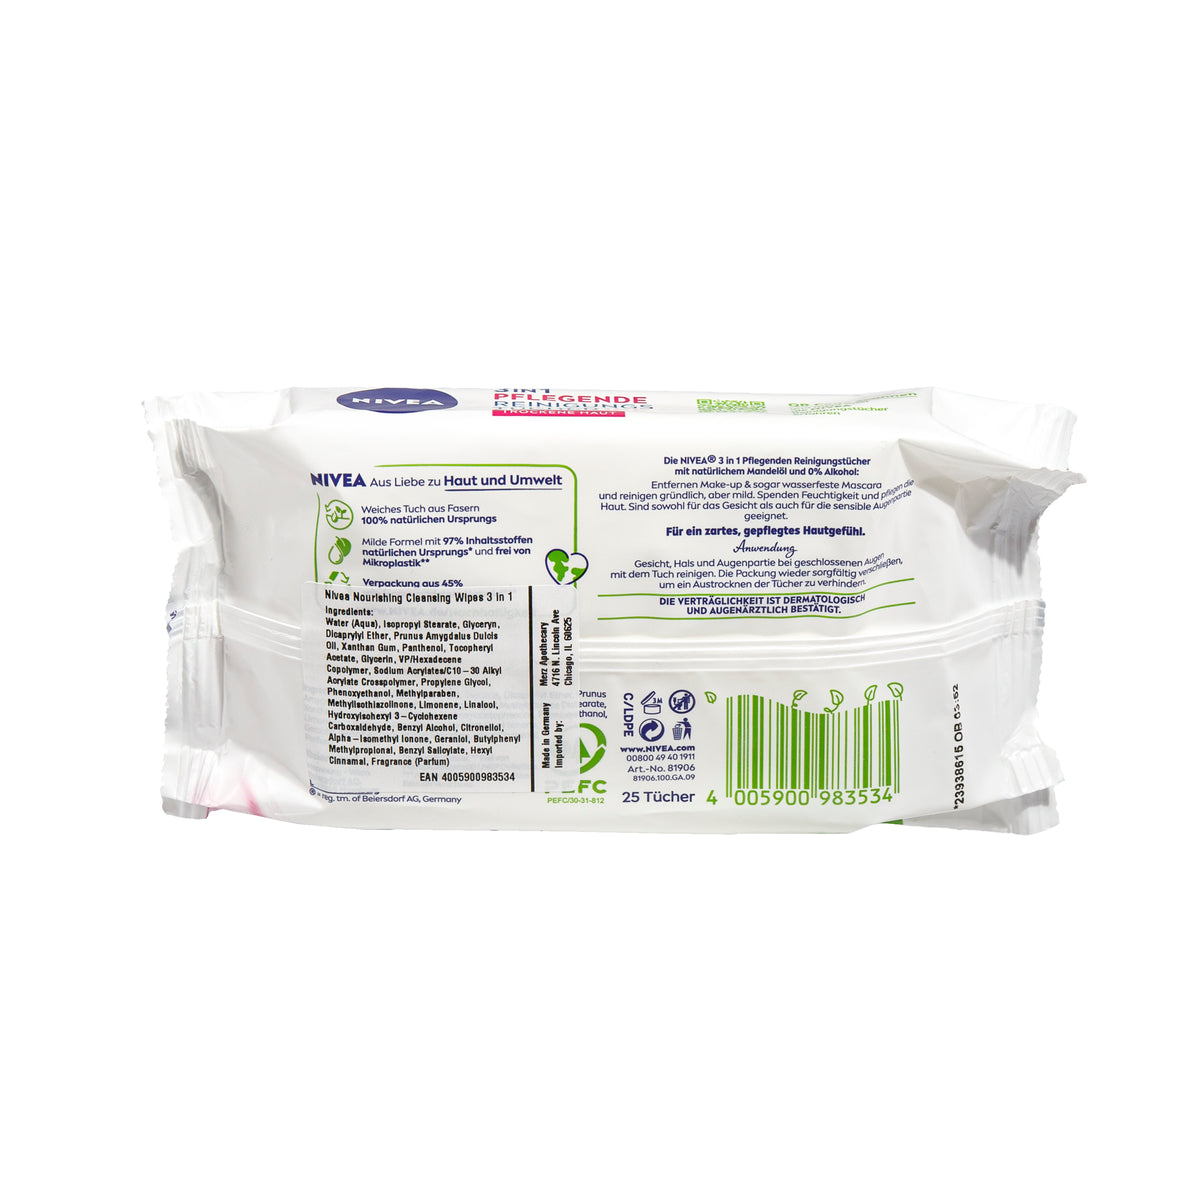 Primary Image of Cleansing Wipes